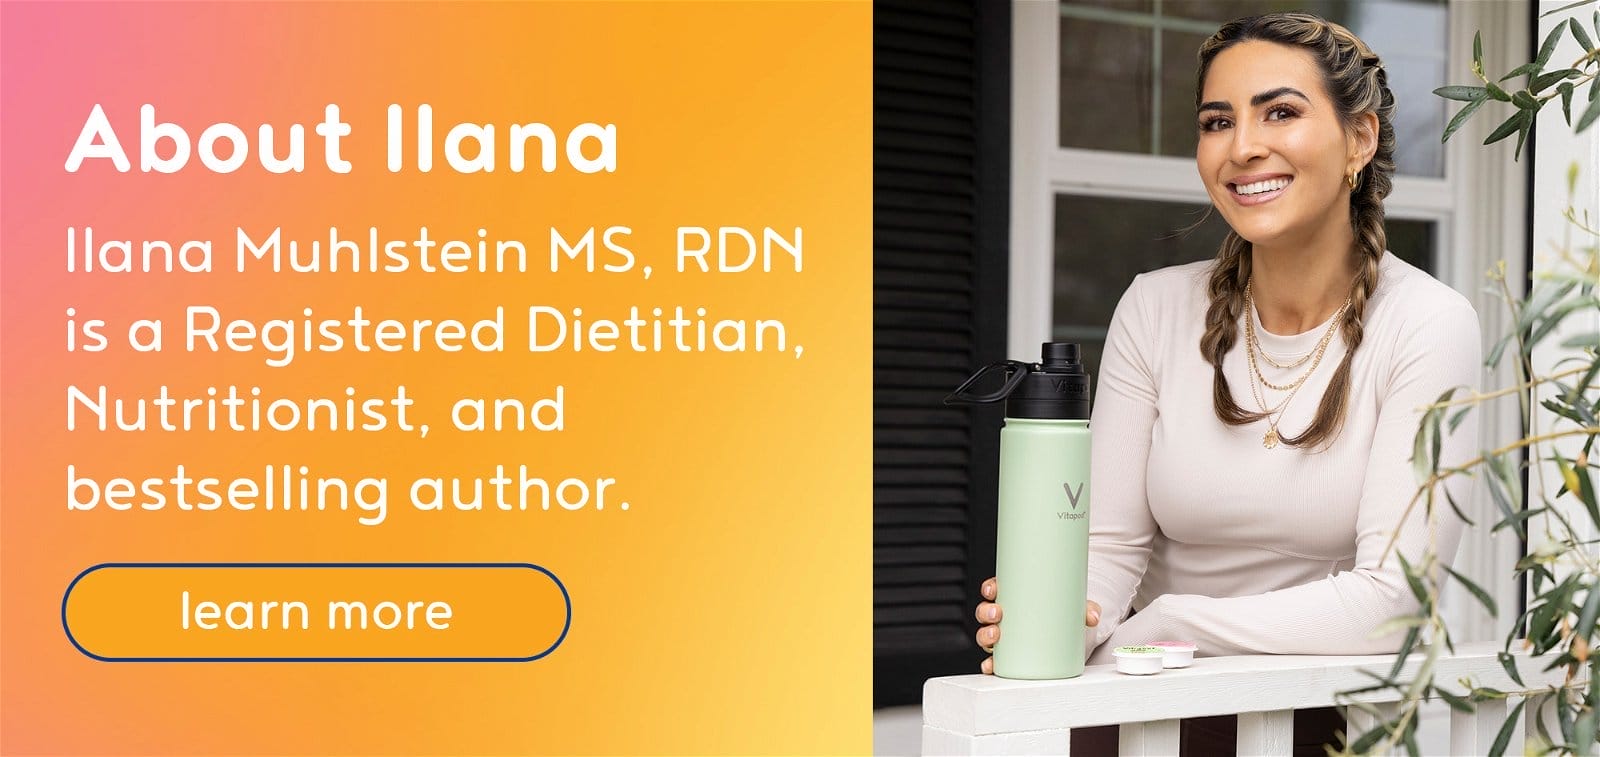 Learn More About Ilana